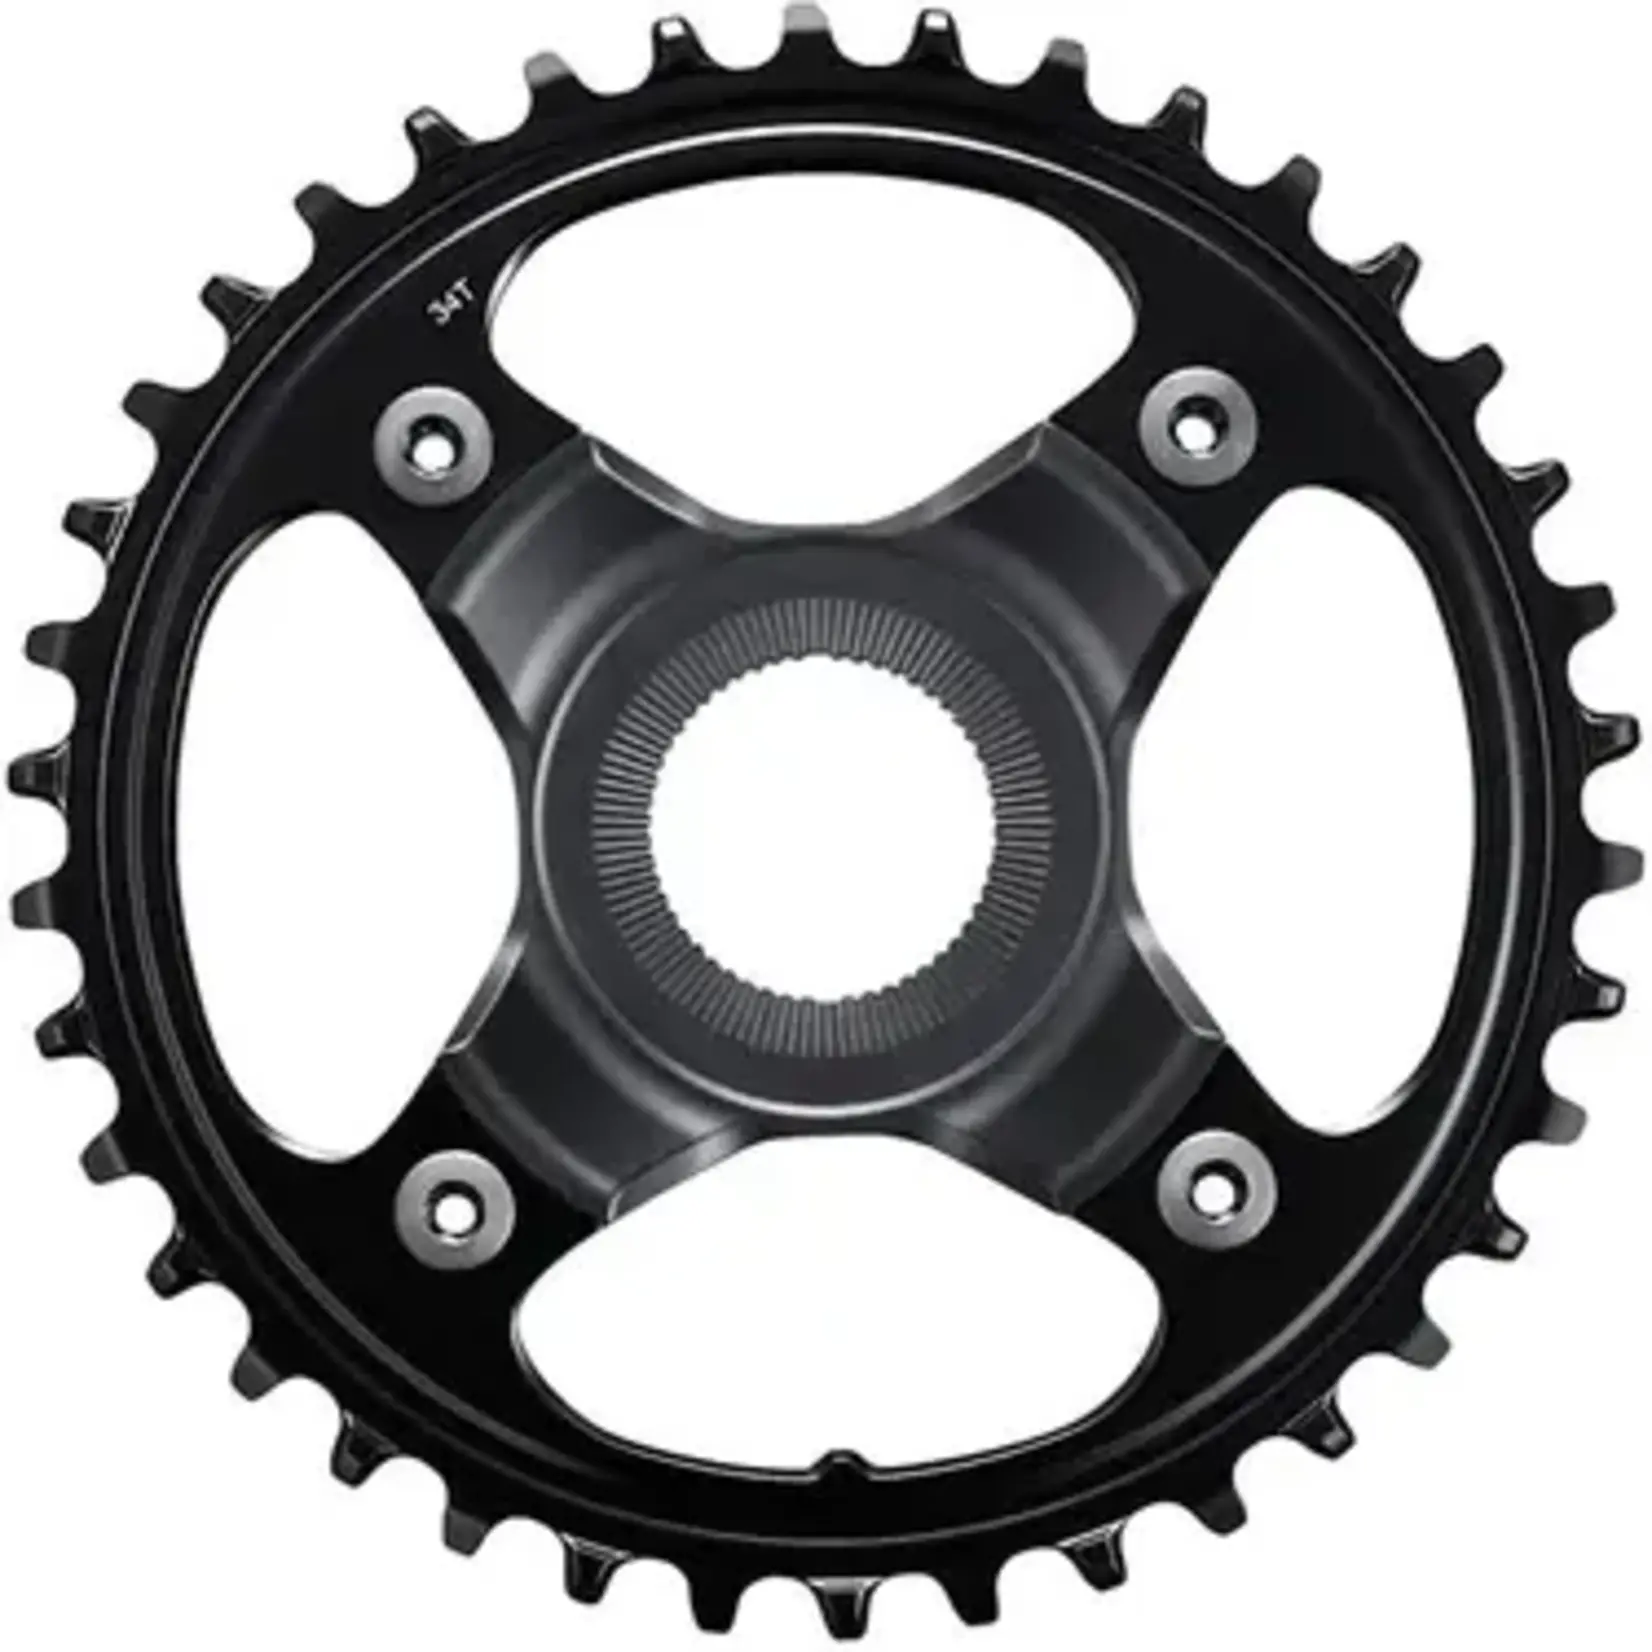 Shimano STEPS Shimano SM-CRE80 STEPS chainring for FC-E8000, 34T 50mm chainline